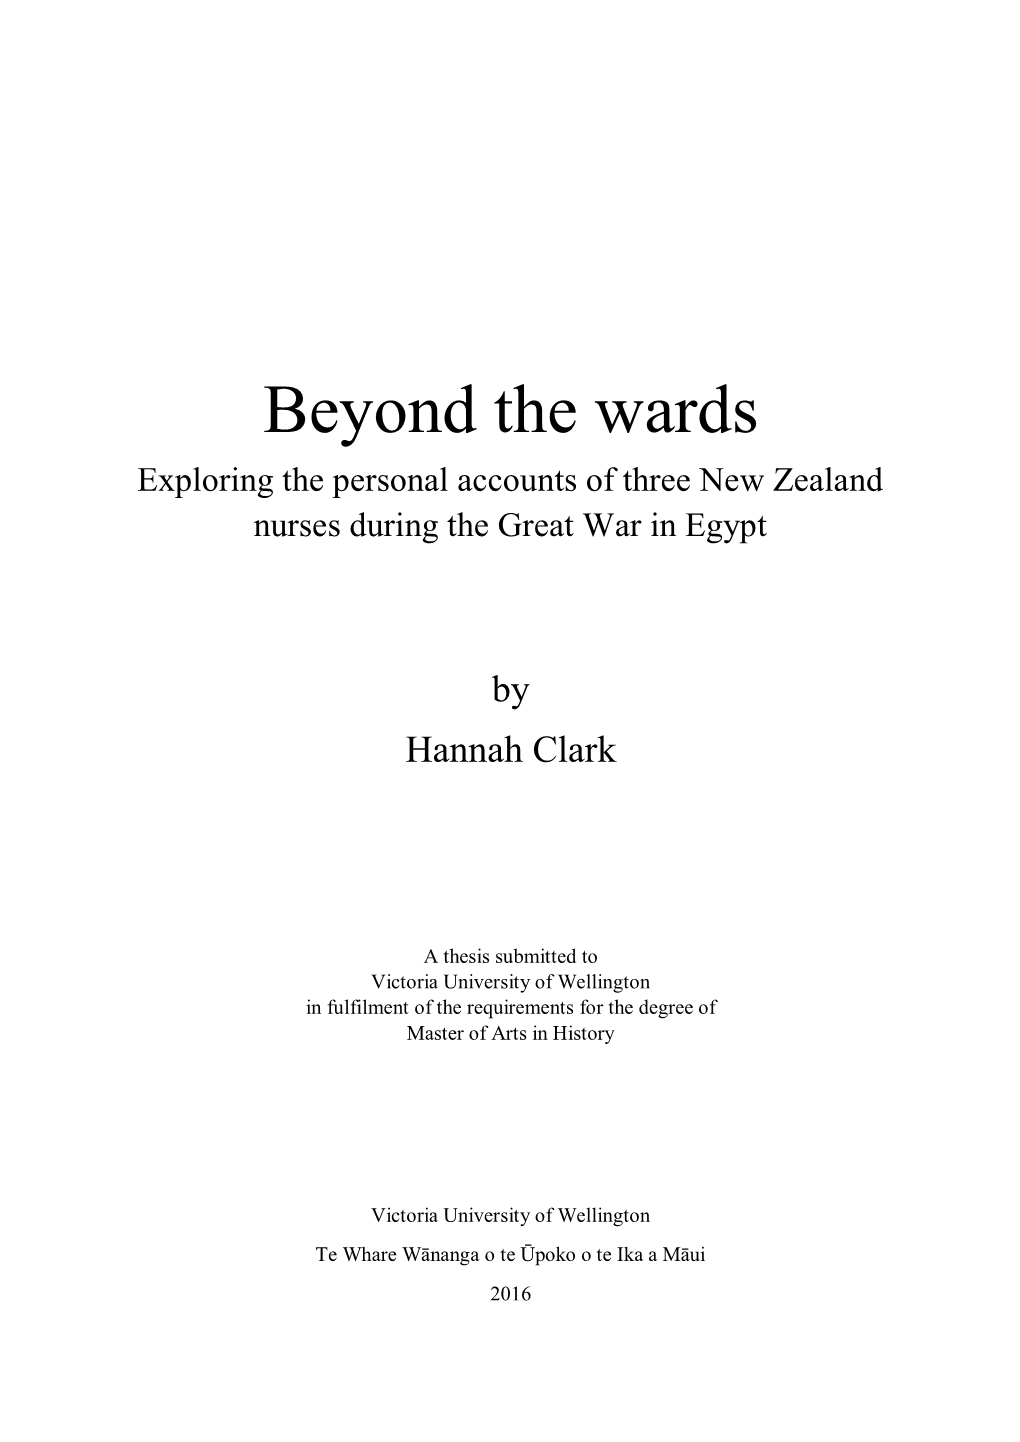 Beyond the Wards Exploring the Personal Accounts of Three New Zealand Nurses During the Great War in Egypt